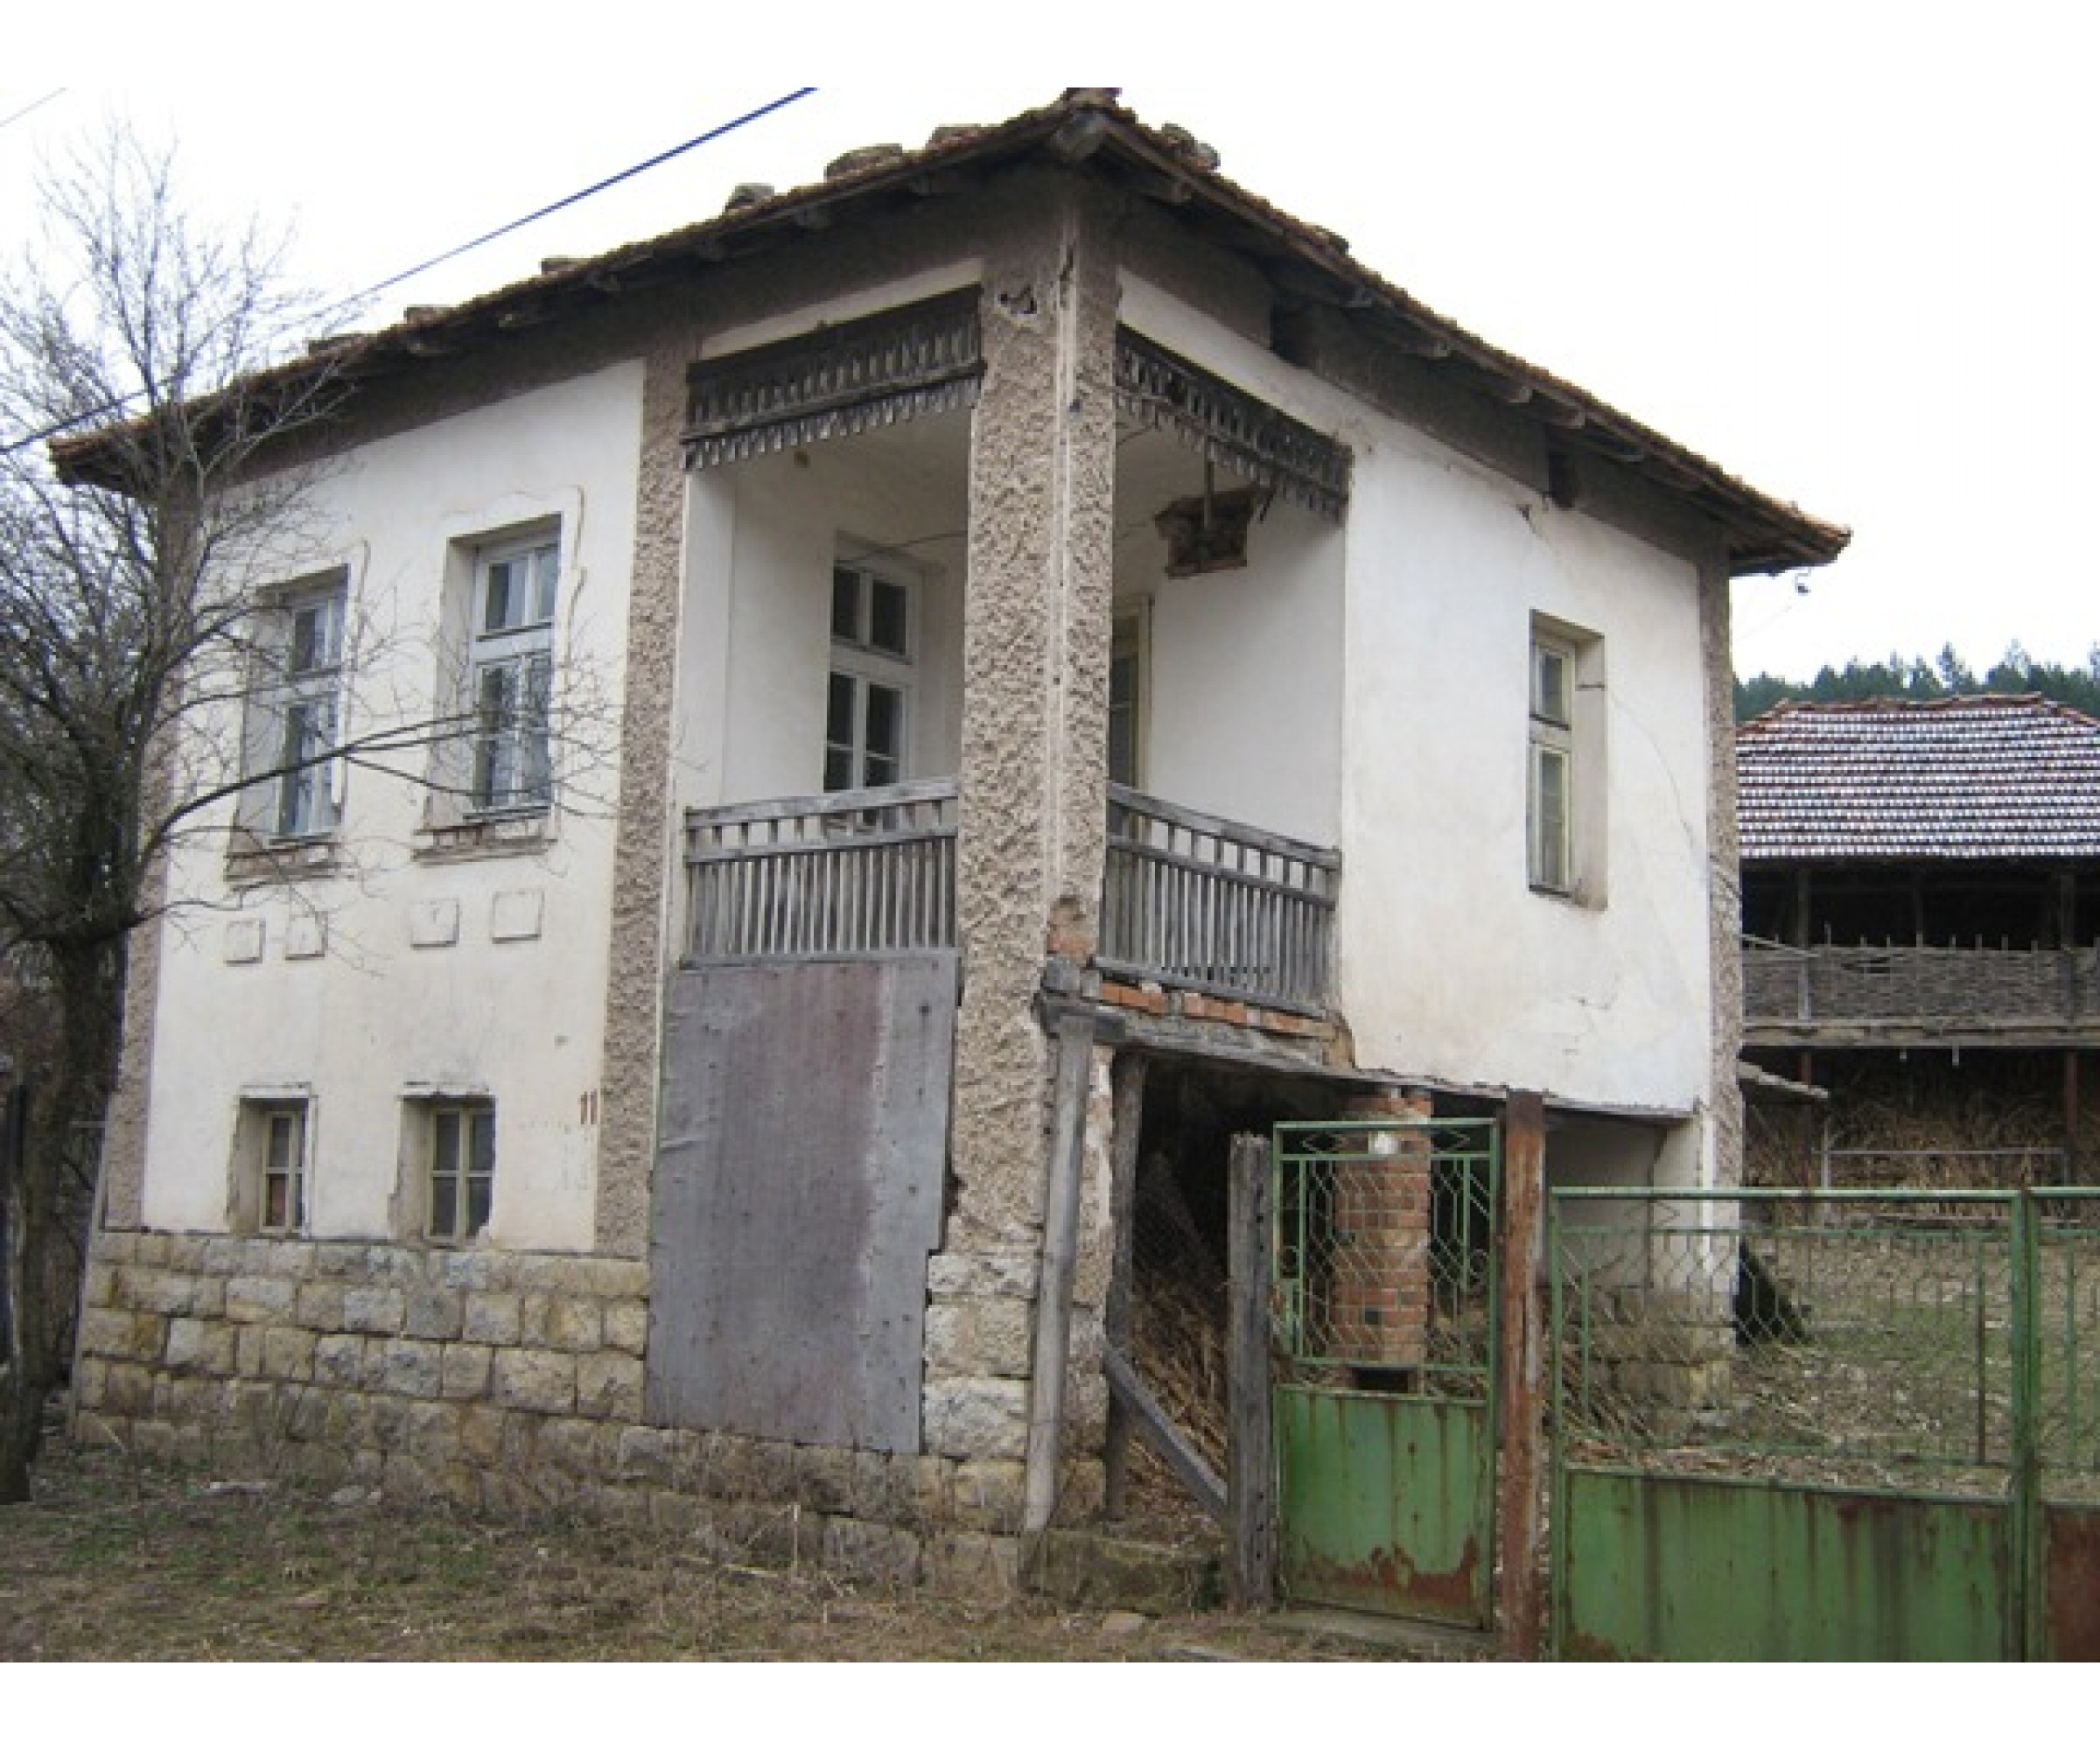 Two-storey house in the village of Cherkaski